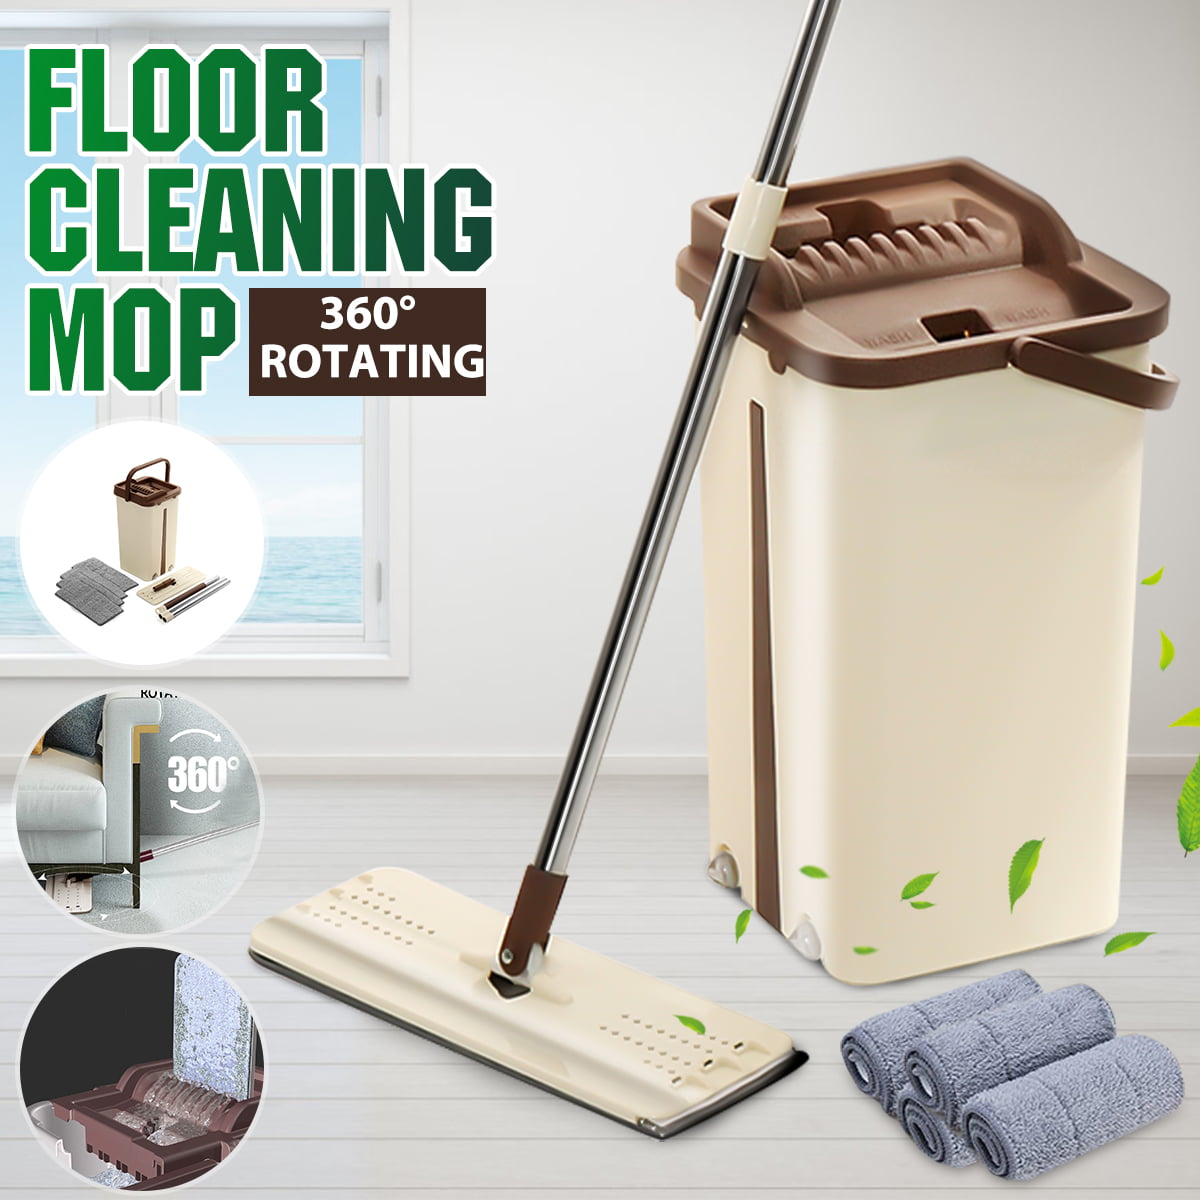 4 MICROFIBER MOP HEAD DRY WET CLEANING FOR 360° ROTATING SPIN PLASTIC MOP BUCKET